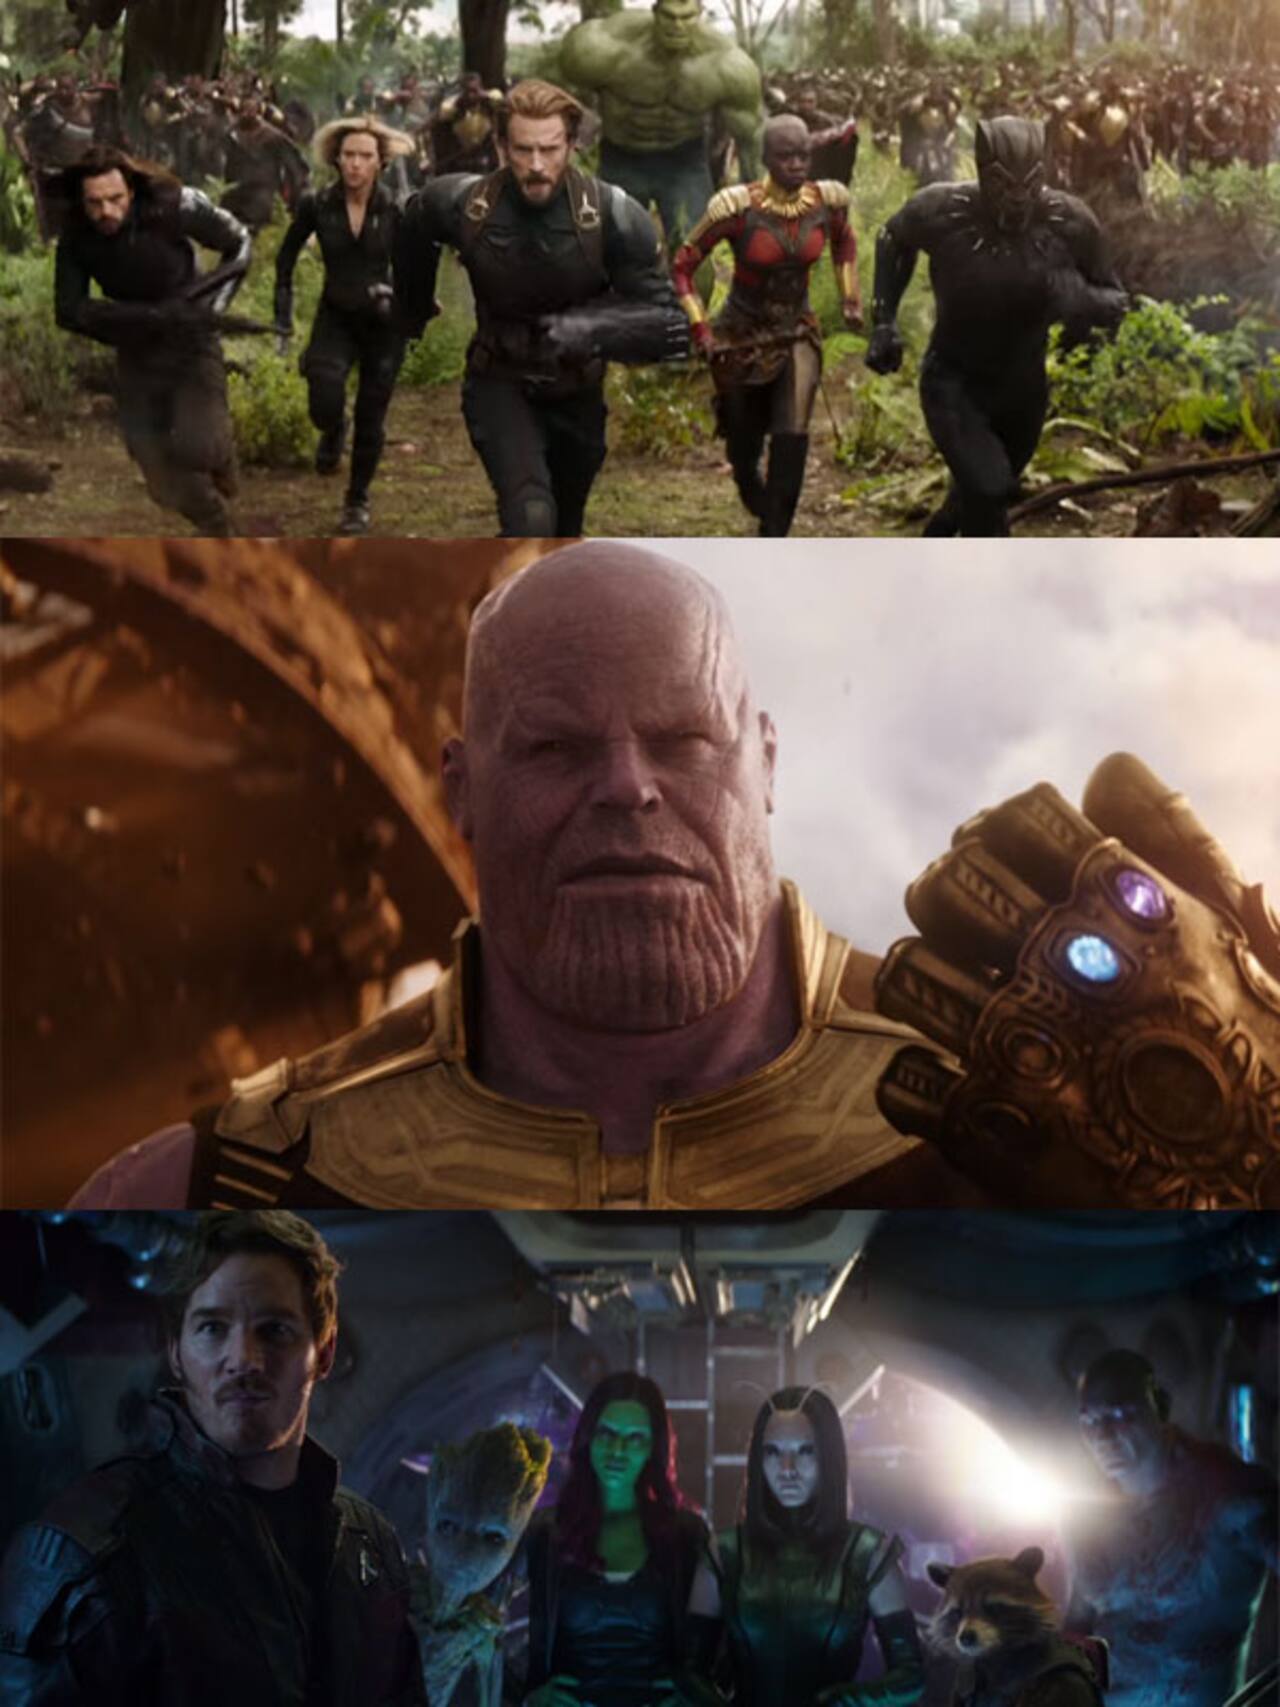 Avengers Infinity War Hindi trailer: Thanos promises destruction of all  superheroes in this action-packed video - Bollywood News & Gossip, Movie  Reviews, Trailers & Videos at 